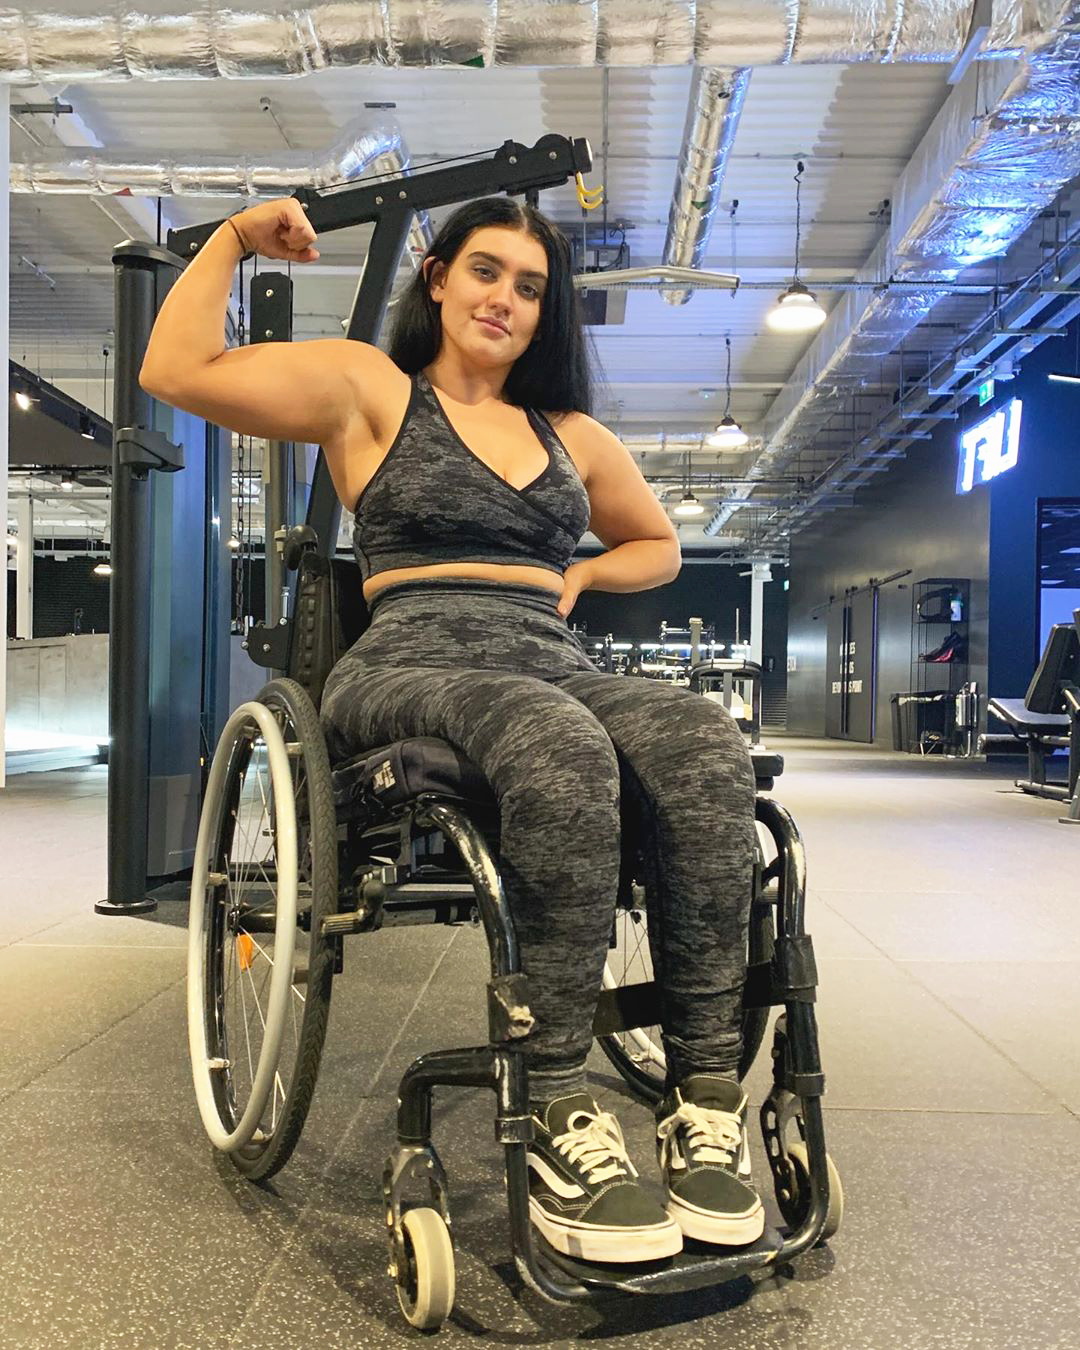 social media influencer sophie butler flexing muscles in wheelchair at the gym